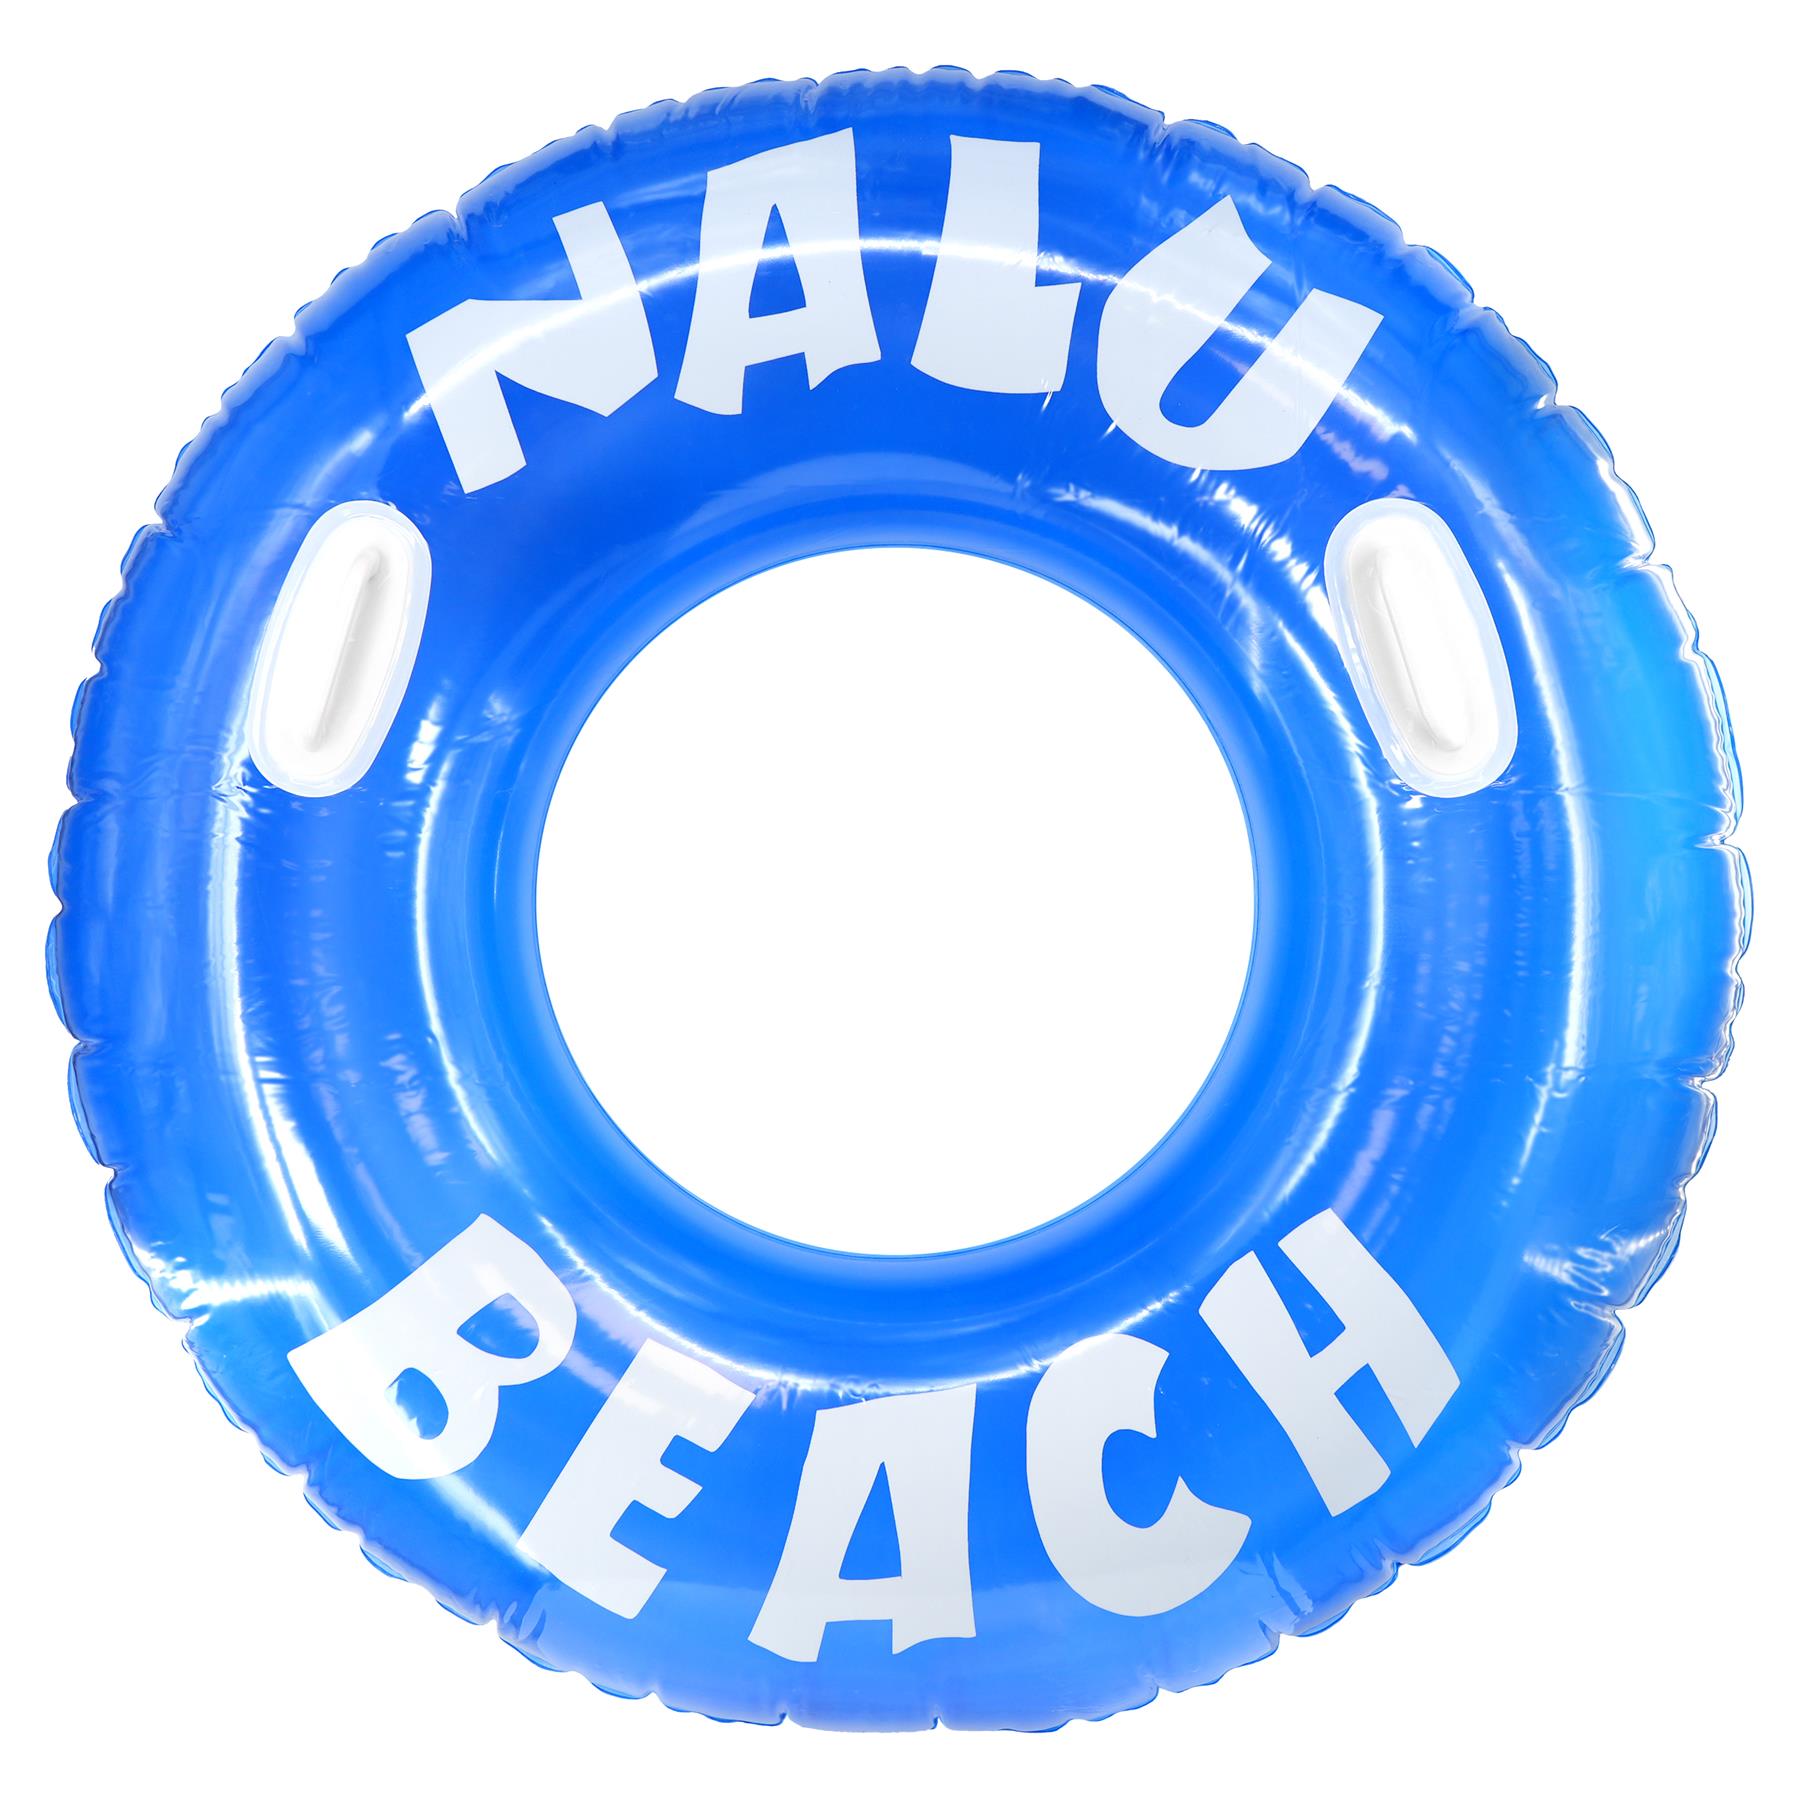 Nalu Blue Turbo Tyre Ring With Handles by Nalu - The Magic Toy Shop